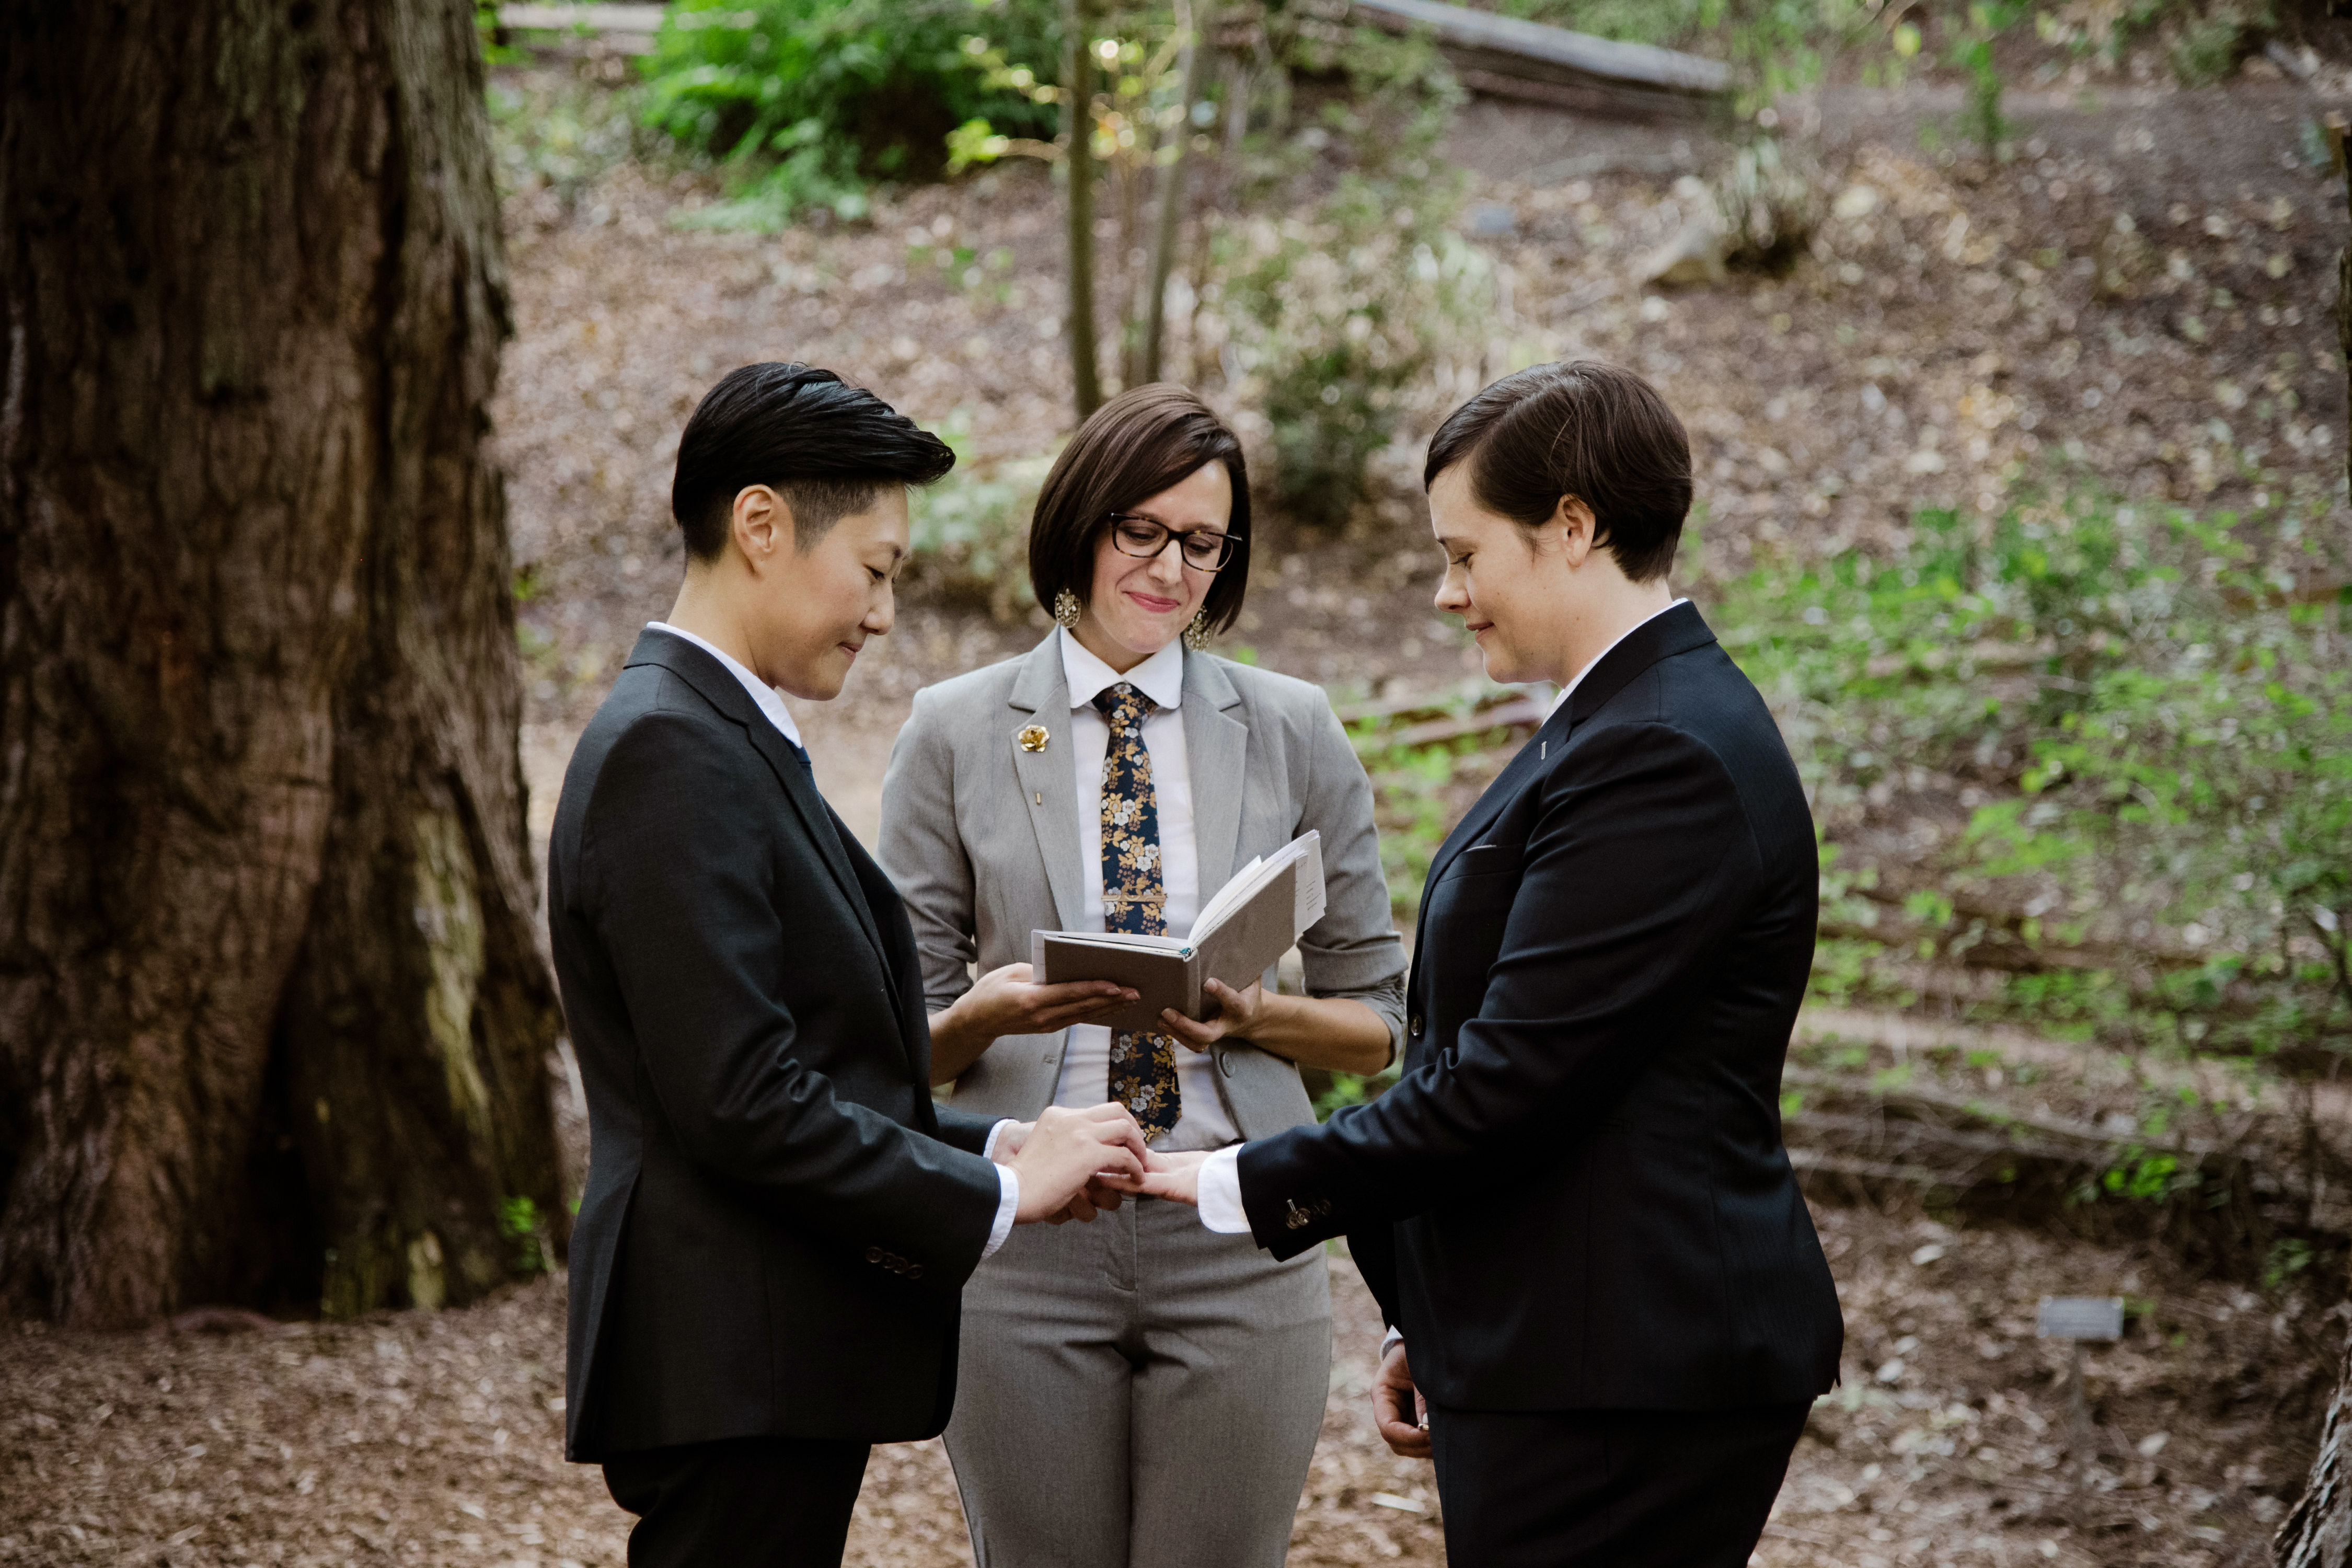 Three people wear suits during a wedding ceremony